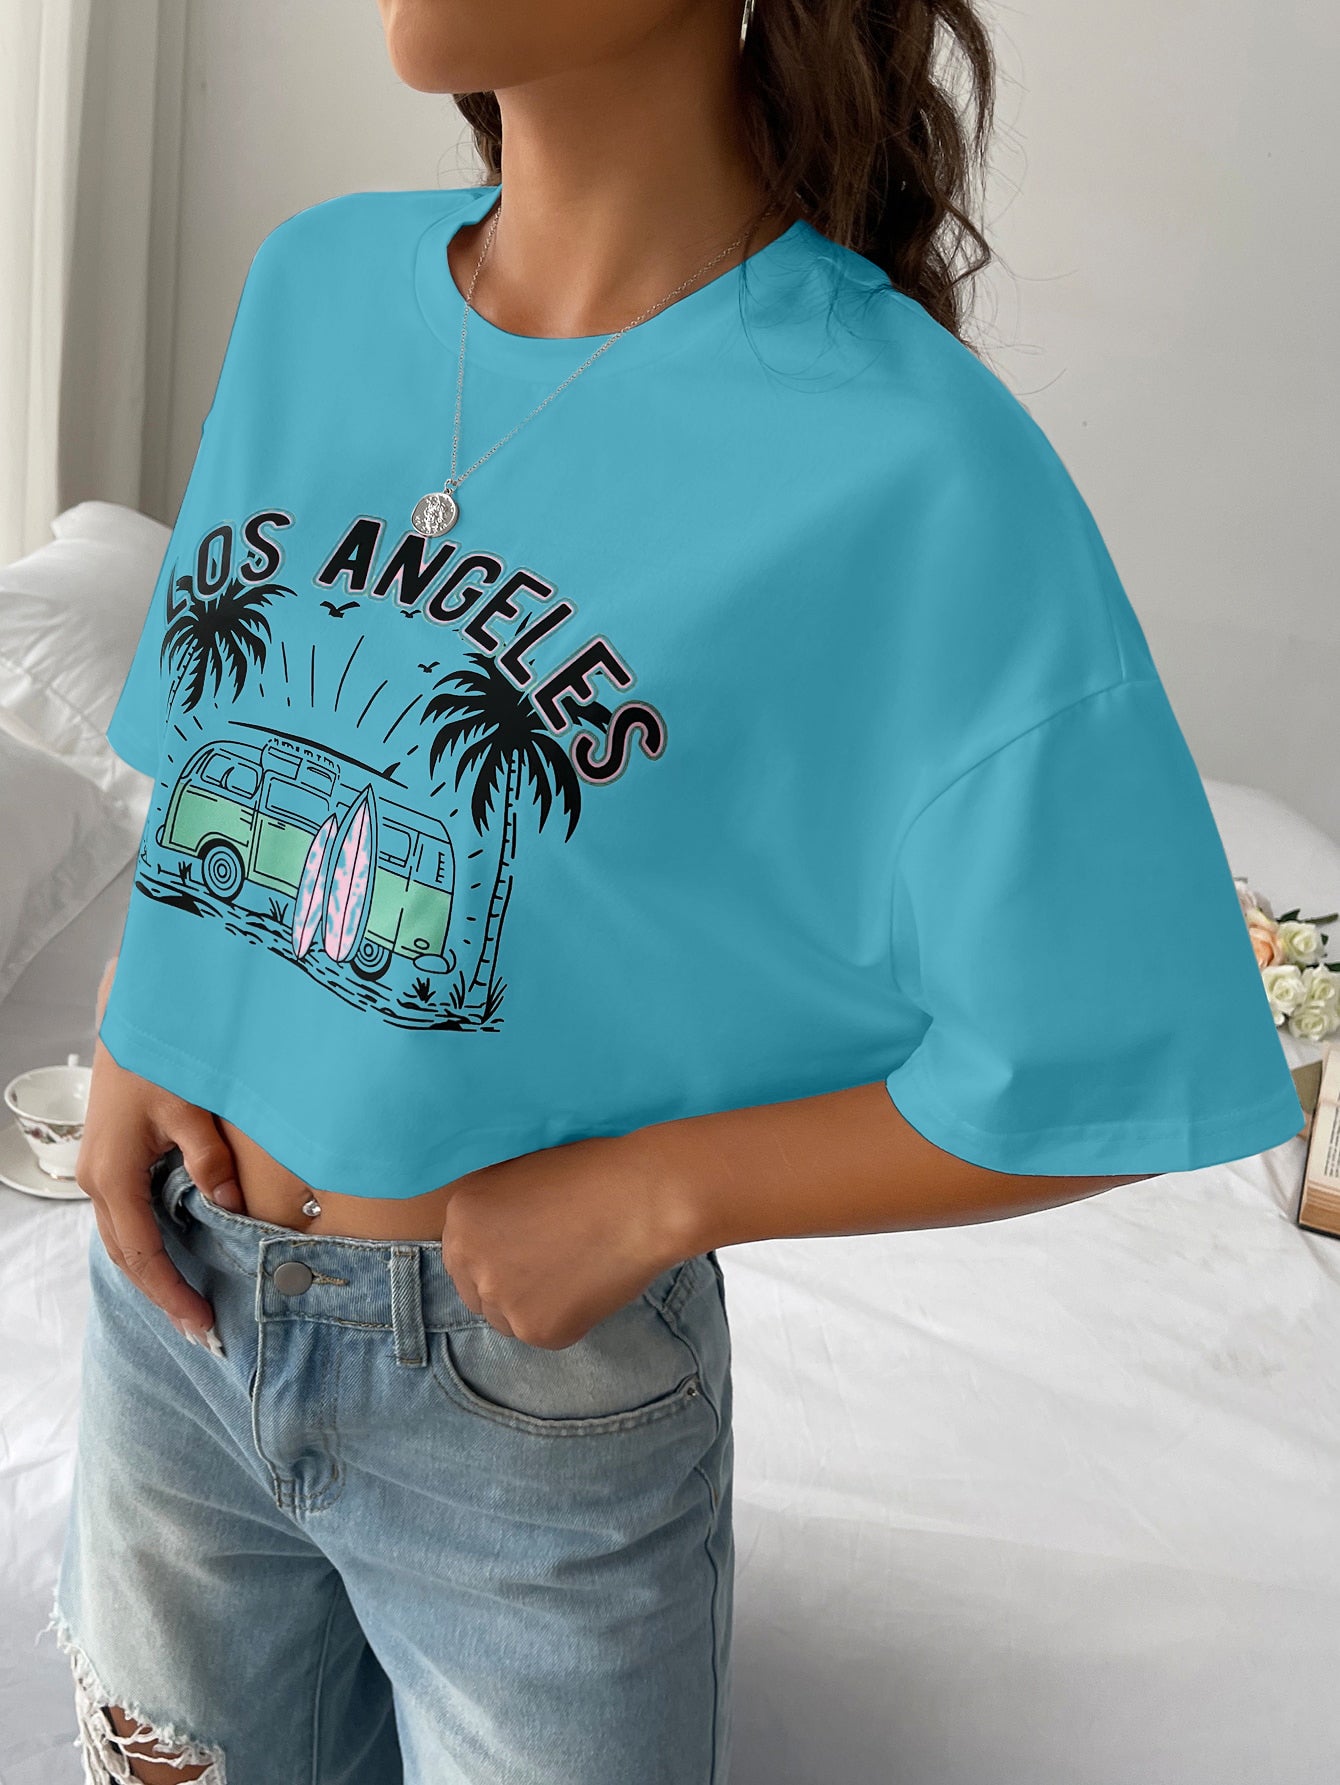 DMITRI SOLID CAR & LETTER GRAPHIC DROP SHOULDER RELAXED FIT CROP TEE TOP